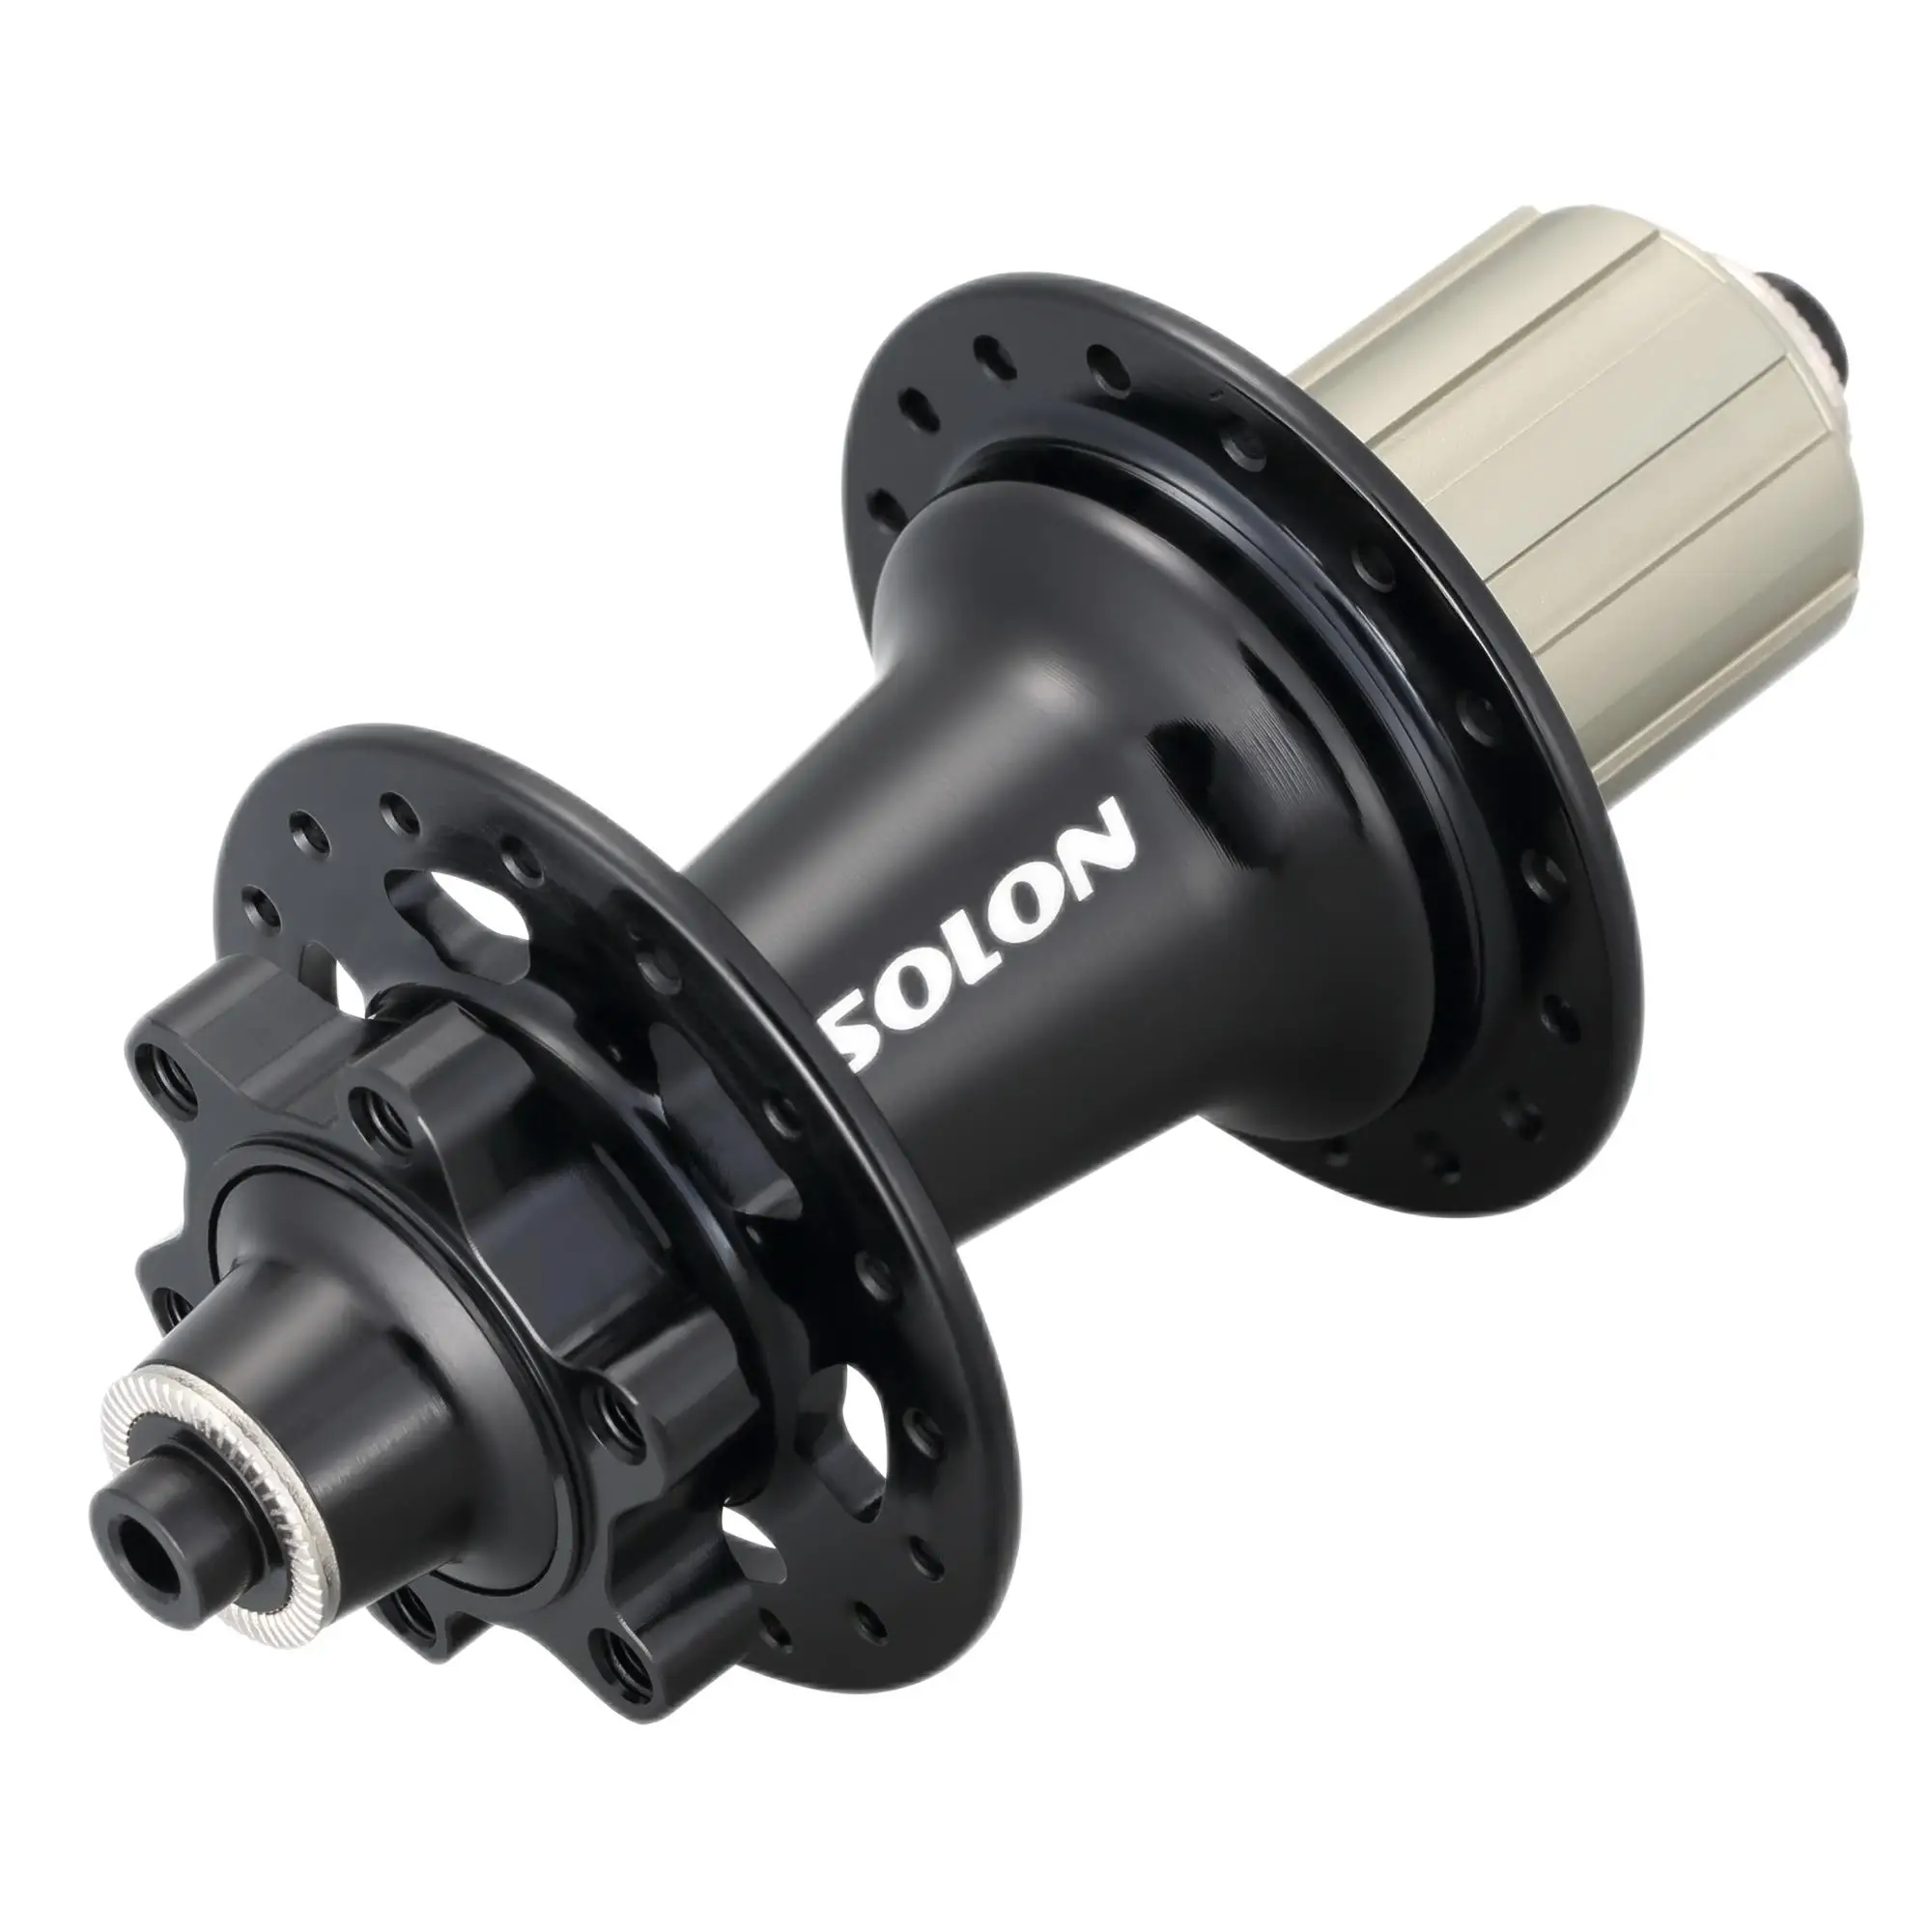 

SOLON DH920SR Alloy MTB disc bicycle Rear Hub with Quick Release 4 bearing 8/9/10/11s cassette hub